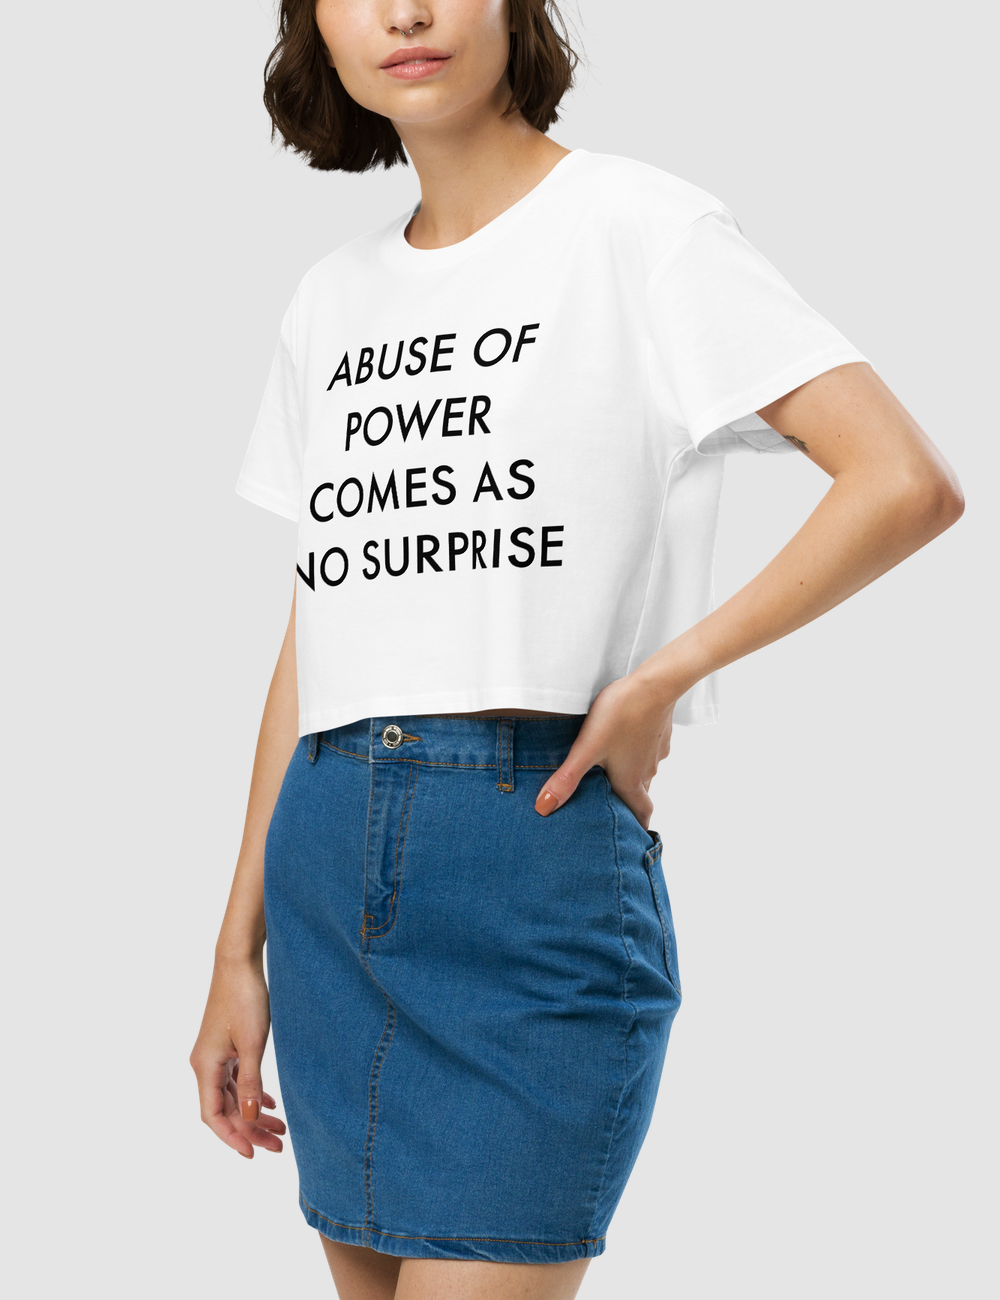 Abuse Of Power Comes As No Surprise Women's Relaxed Crop Top T-Shirt OniTakai